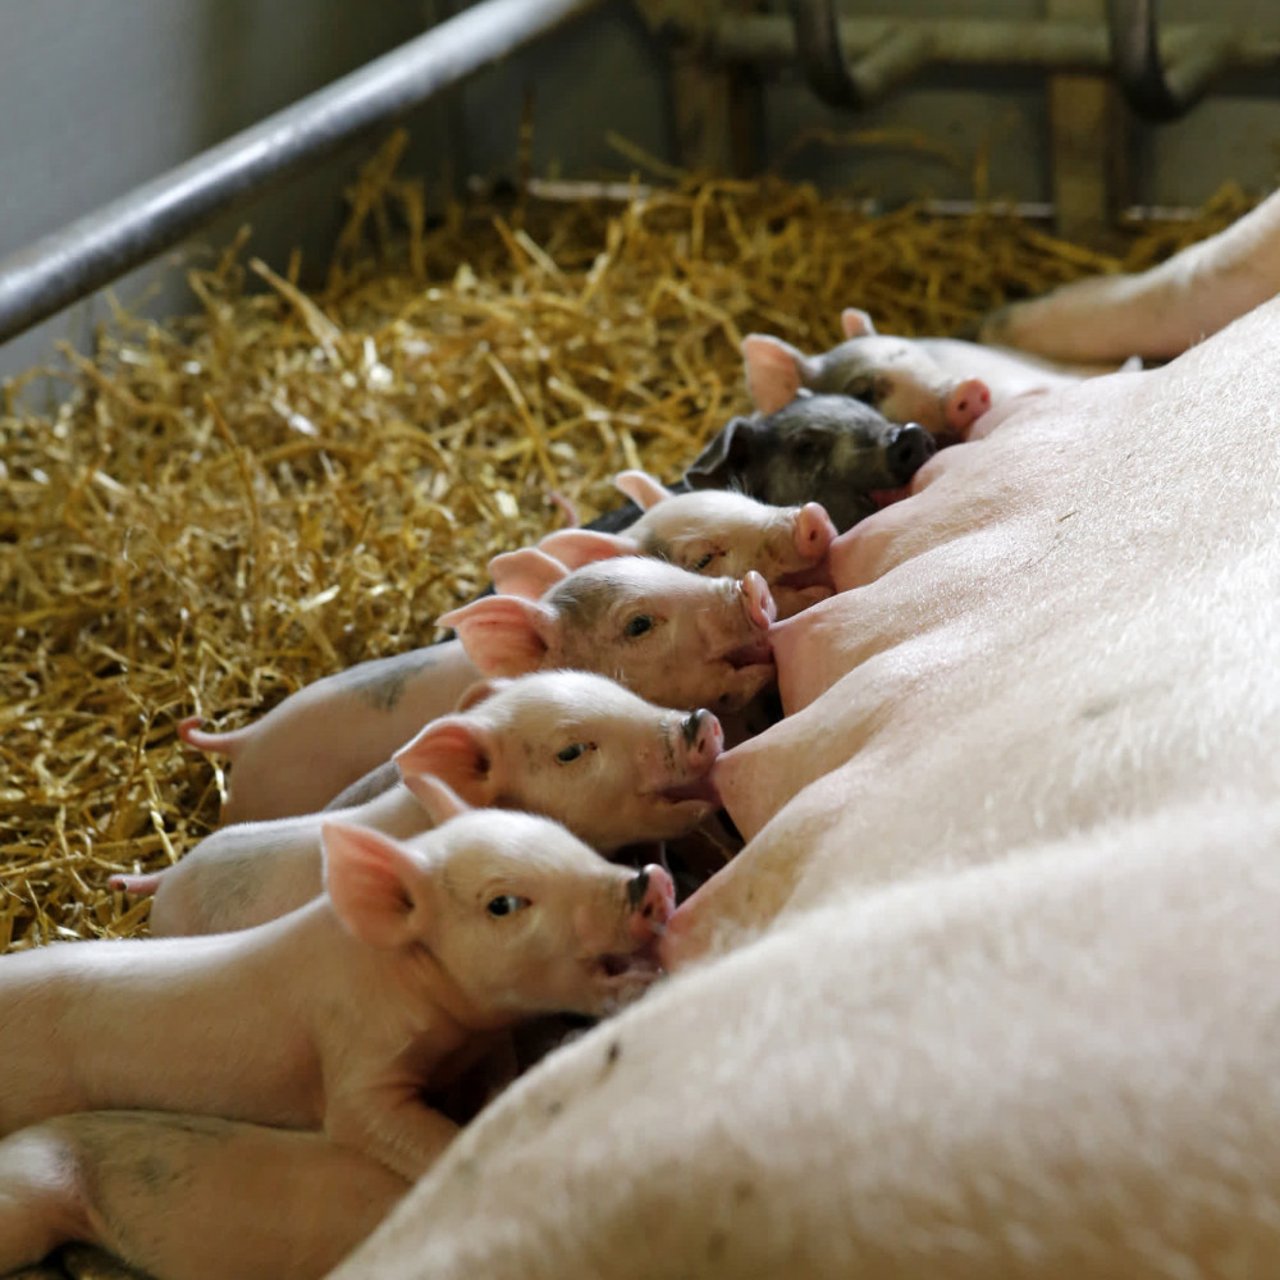 piglets_feeding_from_their_mother_at_an_indoor_farm_in_china_0